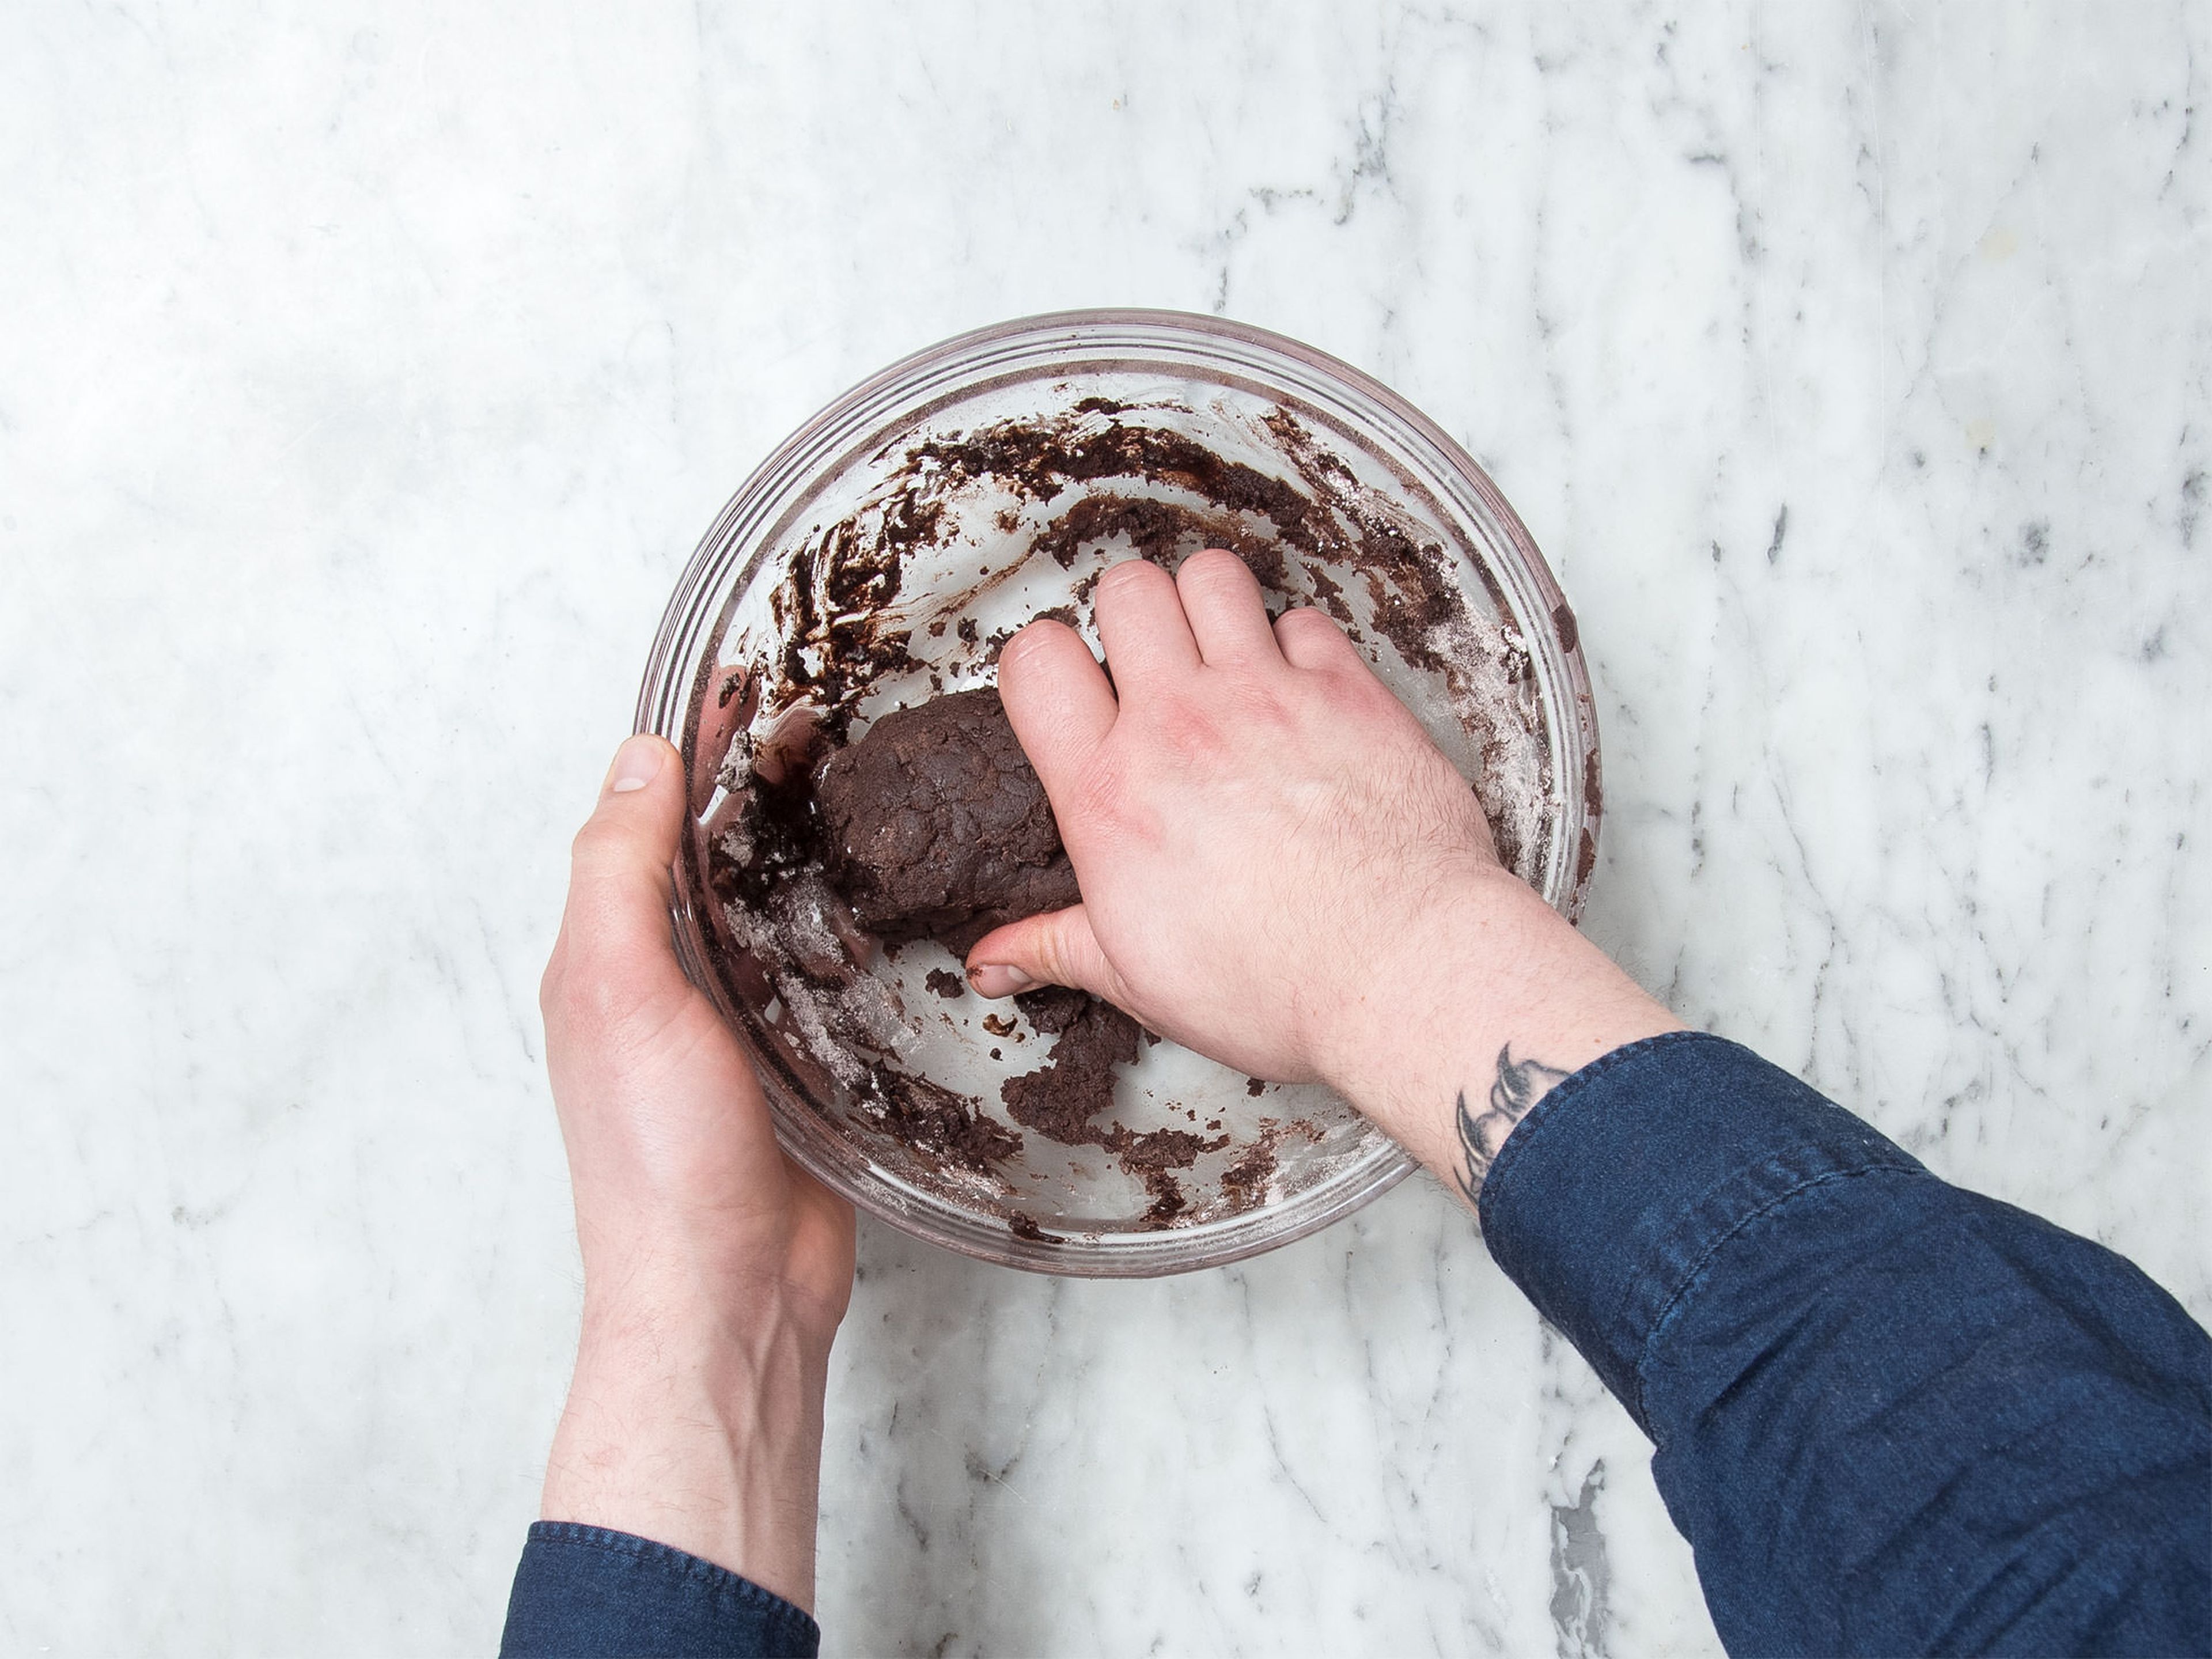 In a large bowl beat butter until creamy, approx. 1 min with the hand mixer with beaters. Gradually add in confectioner’s sugar, cocoa, vanilla extract, and salt. Add flour and knead using your hands until dough is smooth.